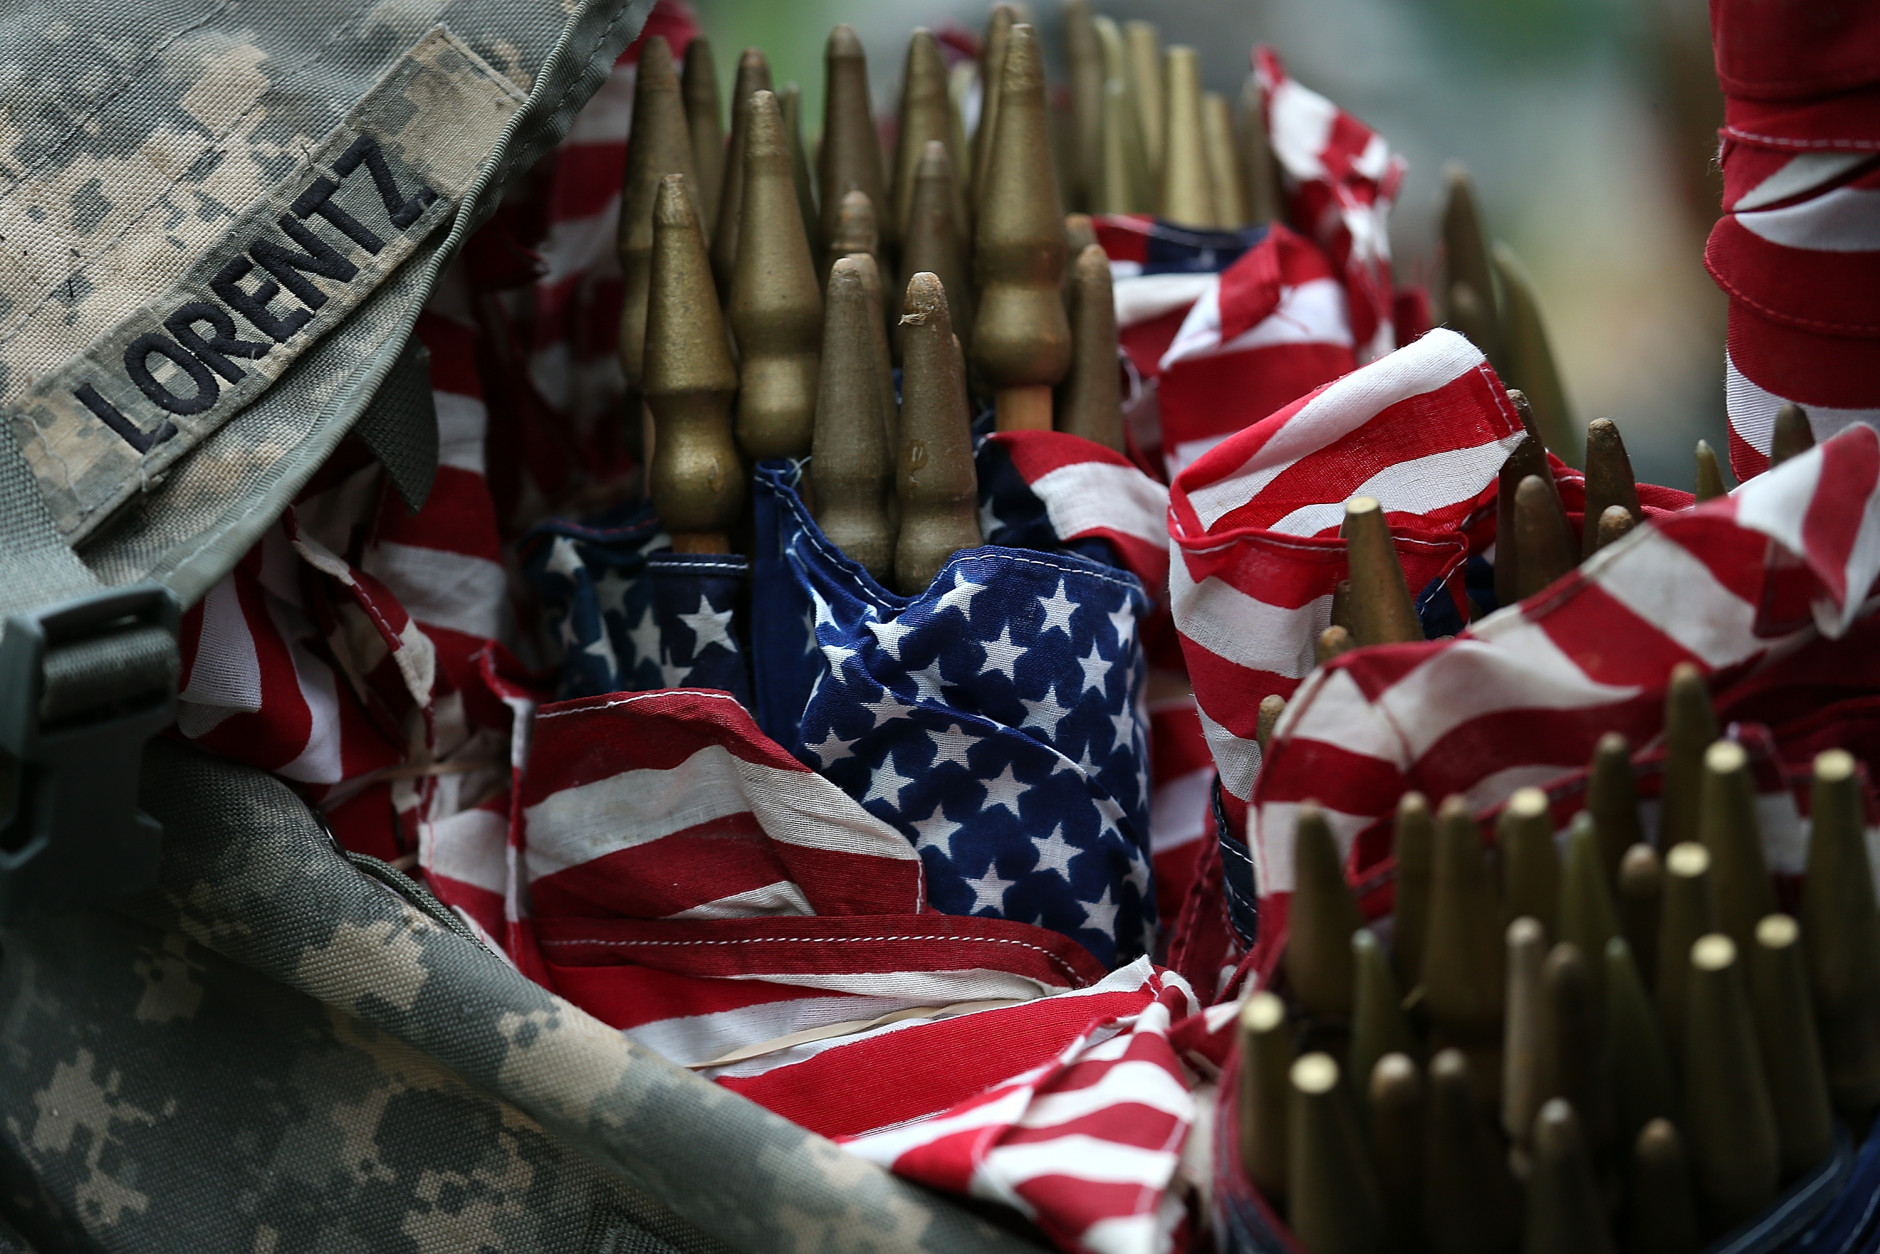 ARLINGTON, VA - MAY 21:  Members of the 3rd U.S. Infantry Regiment load  American flags into their backpacks before placing them at the graves of U.S. soldiers buried at Arlington National Cemetery, in preparation for Memorial Day May 21, 2015 in Arlington, Virginia. "Flags-In" has become an annual ceremony since the 3rd U.S. Infantry Regiment (The Old Guard) was designated to be an Army's official ceremonial unit in 1948  (Photo by Win McNamee/Getty Images)